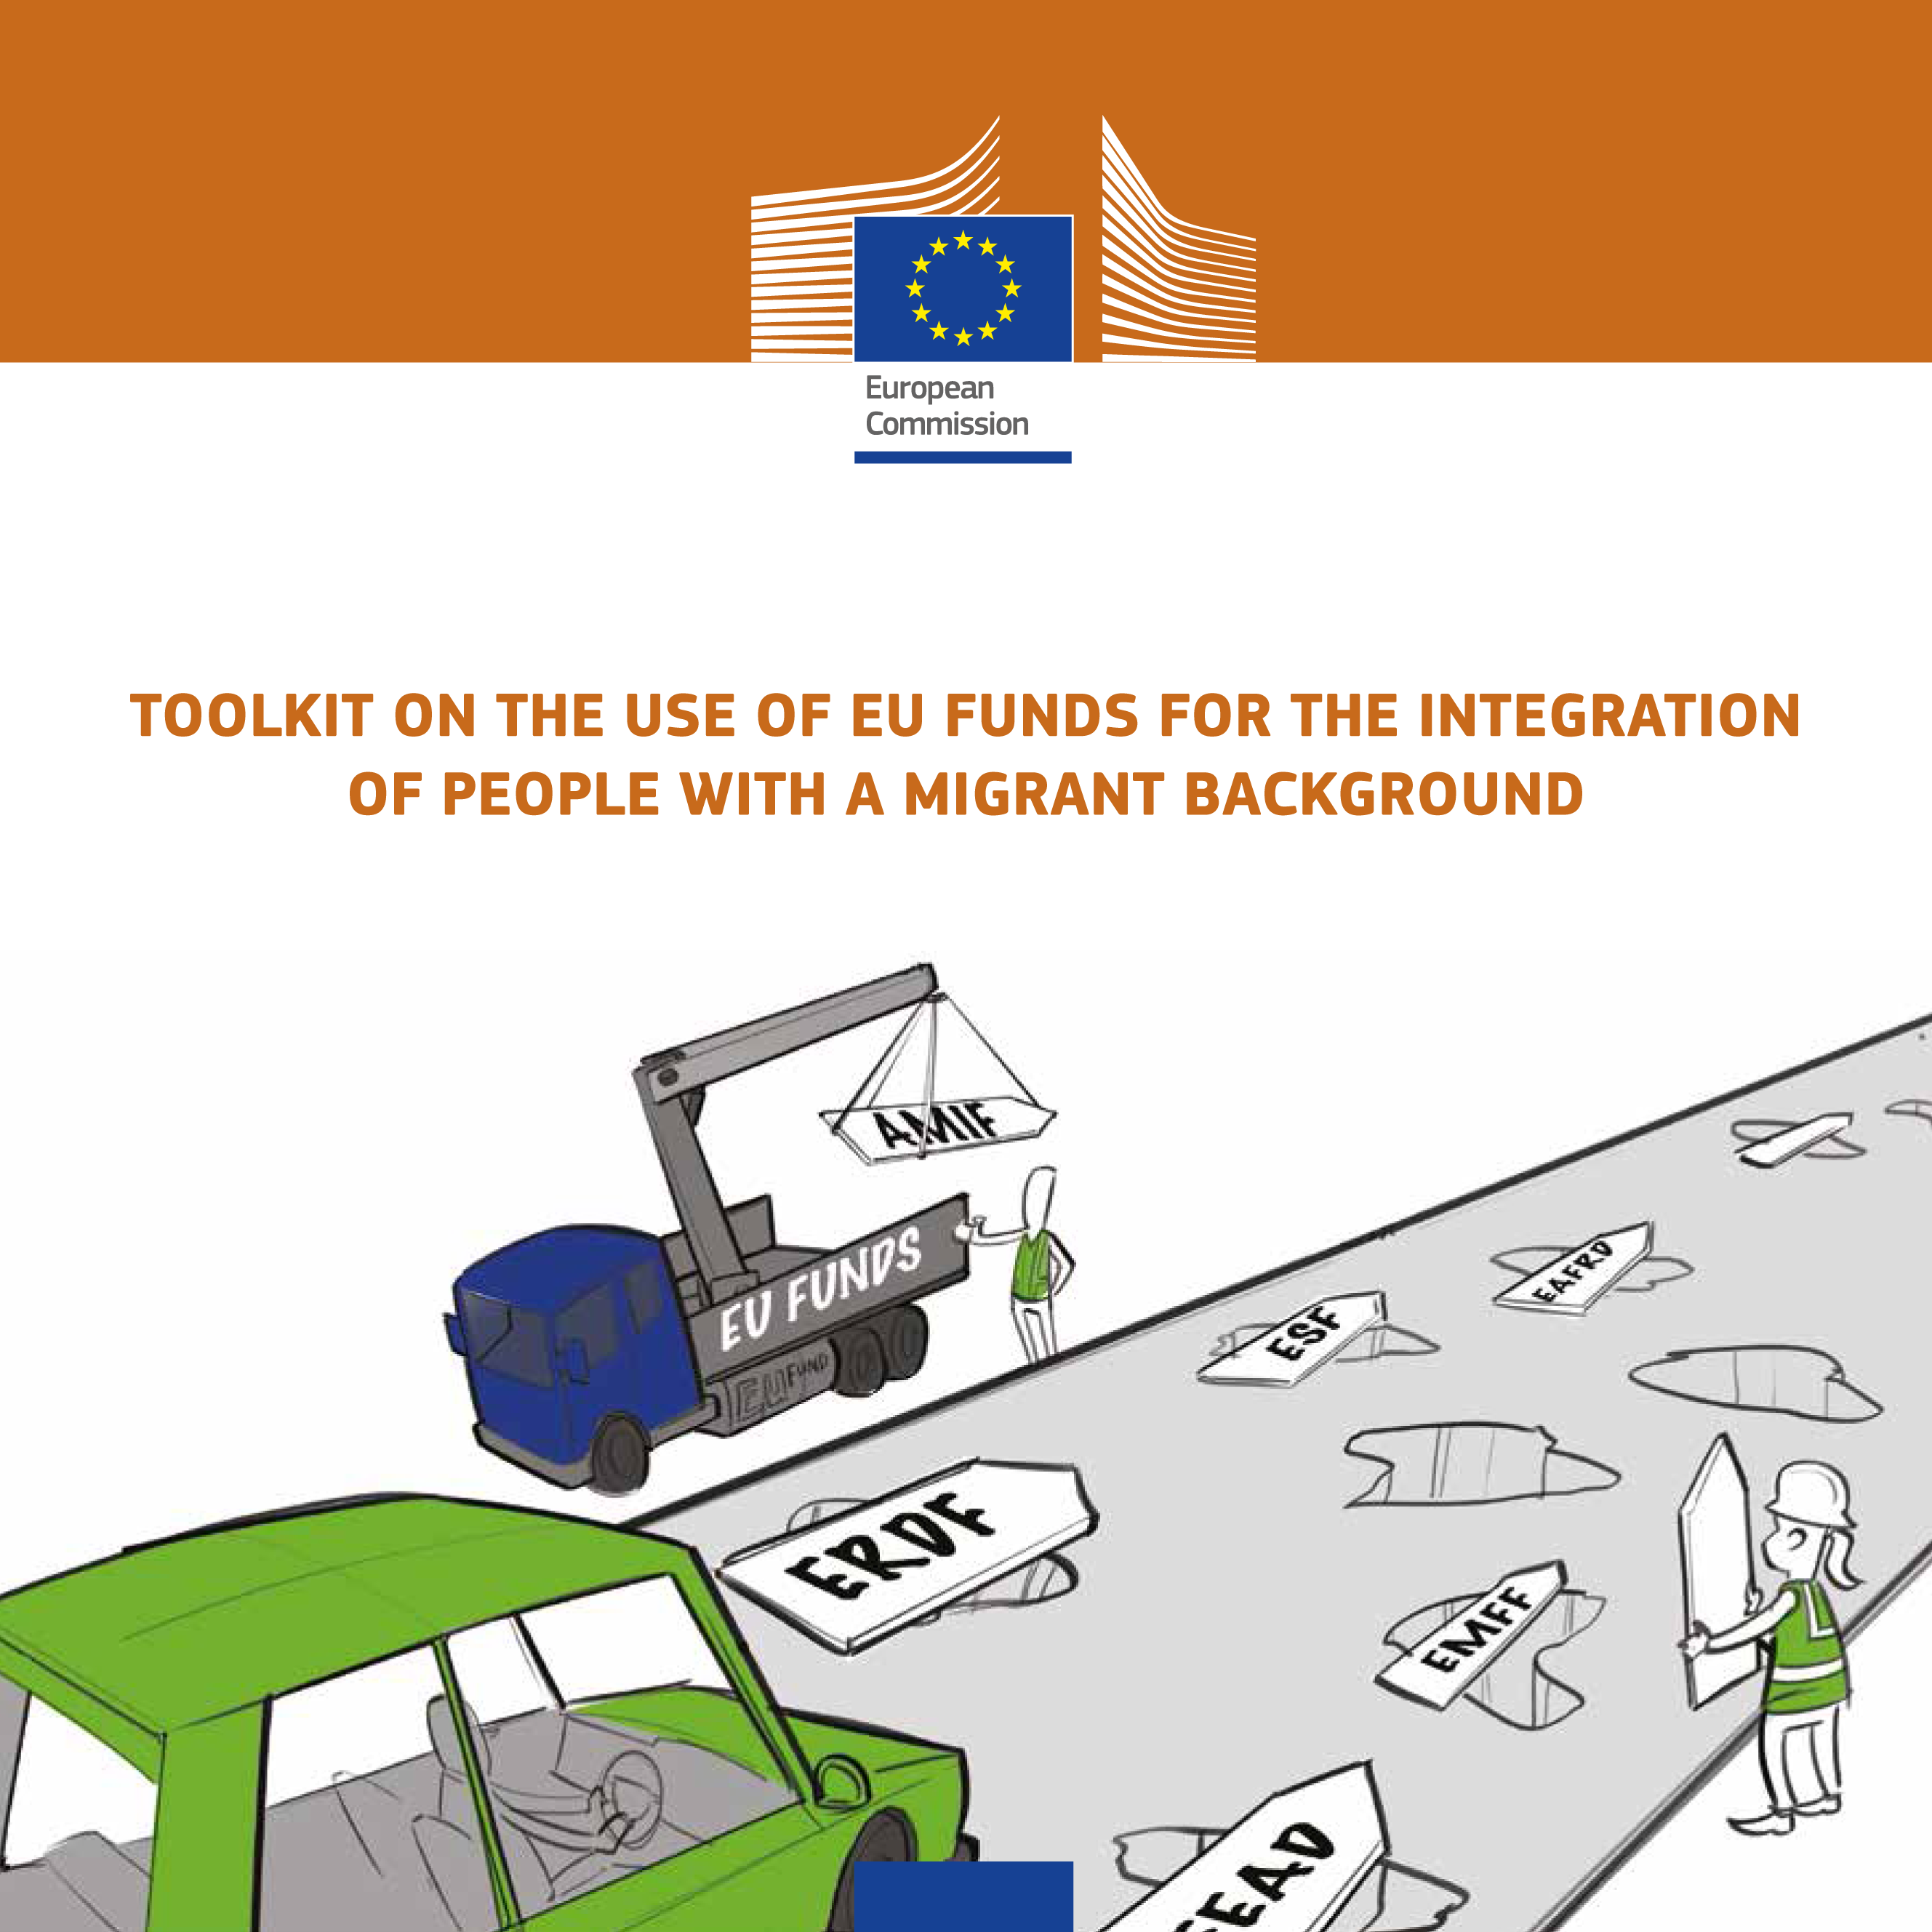 Toolkit on the Use of EU Funds for the Integration of People with a Migrant Background